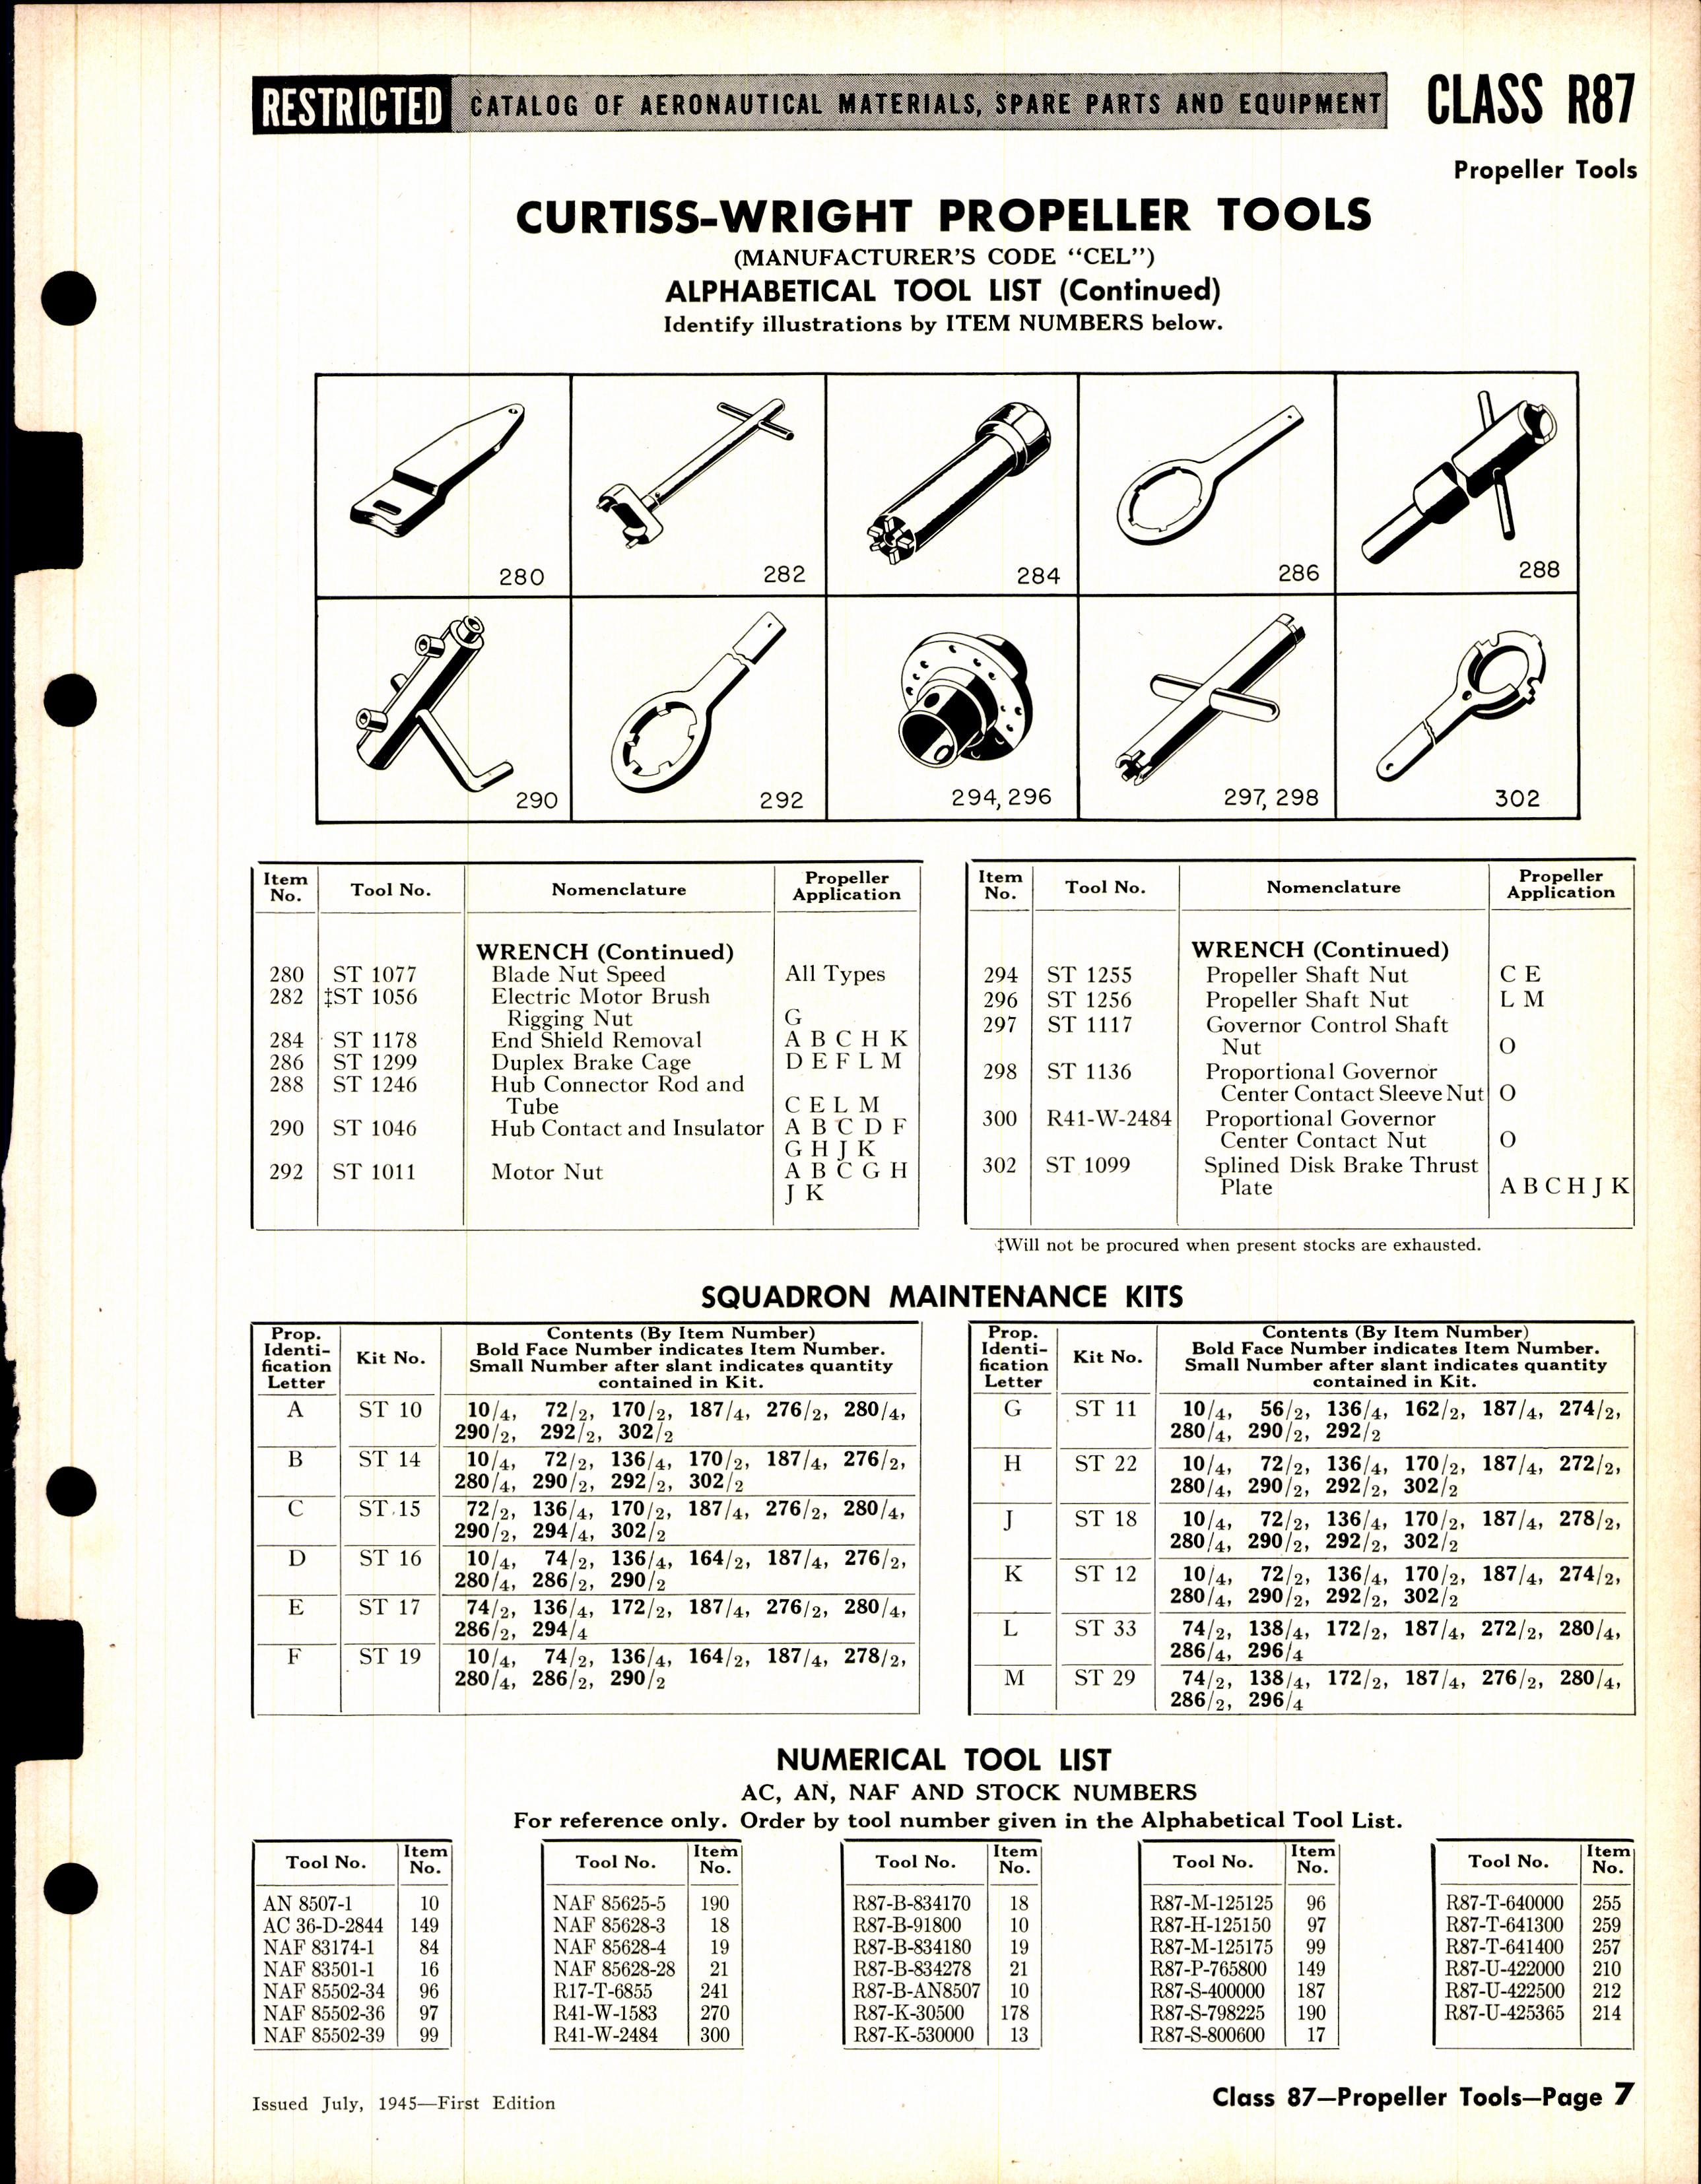 Sample page 7 from AirCorps Library document: Special Tools for Aeroproducts Curtiss-Wright Hamilton Standard and Koppers Propellers